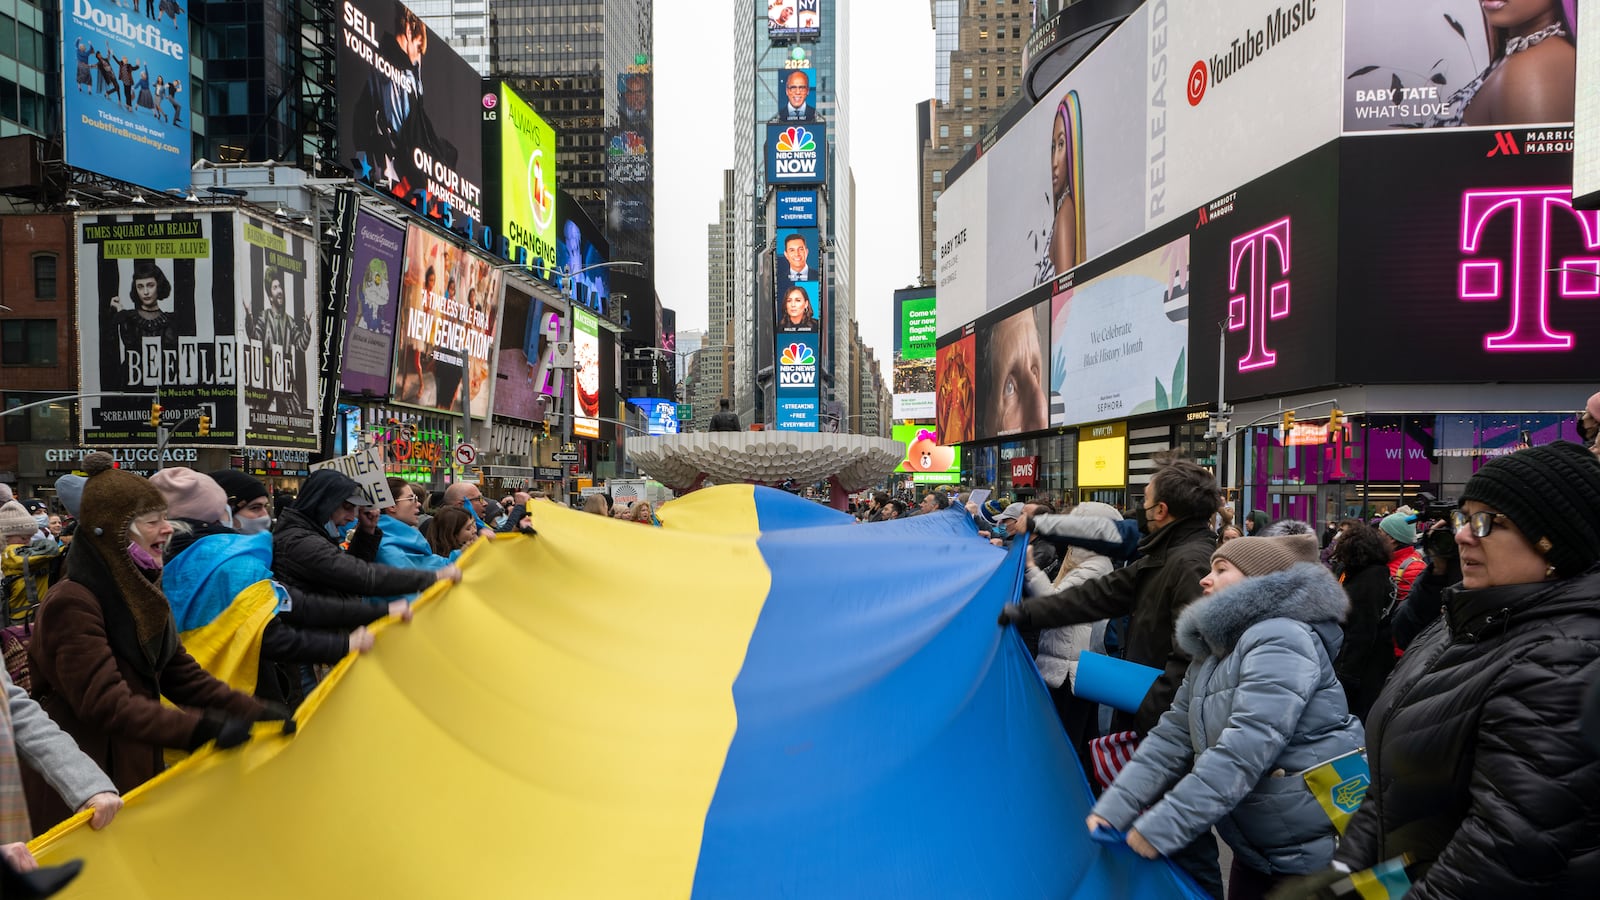 Group of people holding a large Ukrainian flag gather for a “Stand With Ukraine” rally in Times Square, New York City.